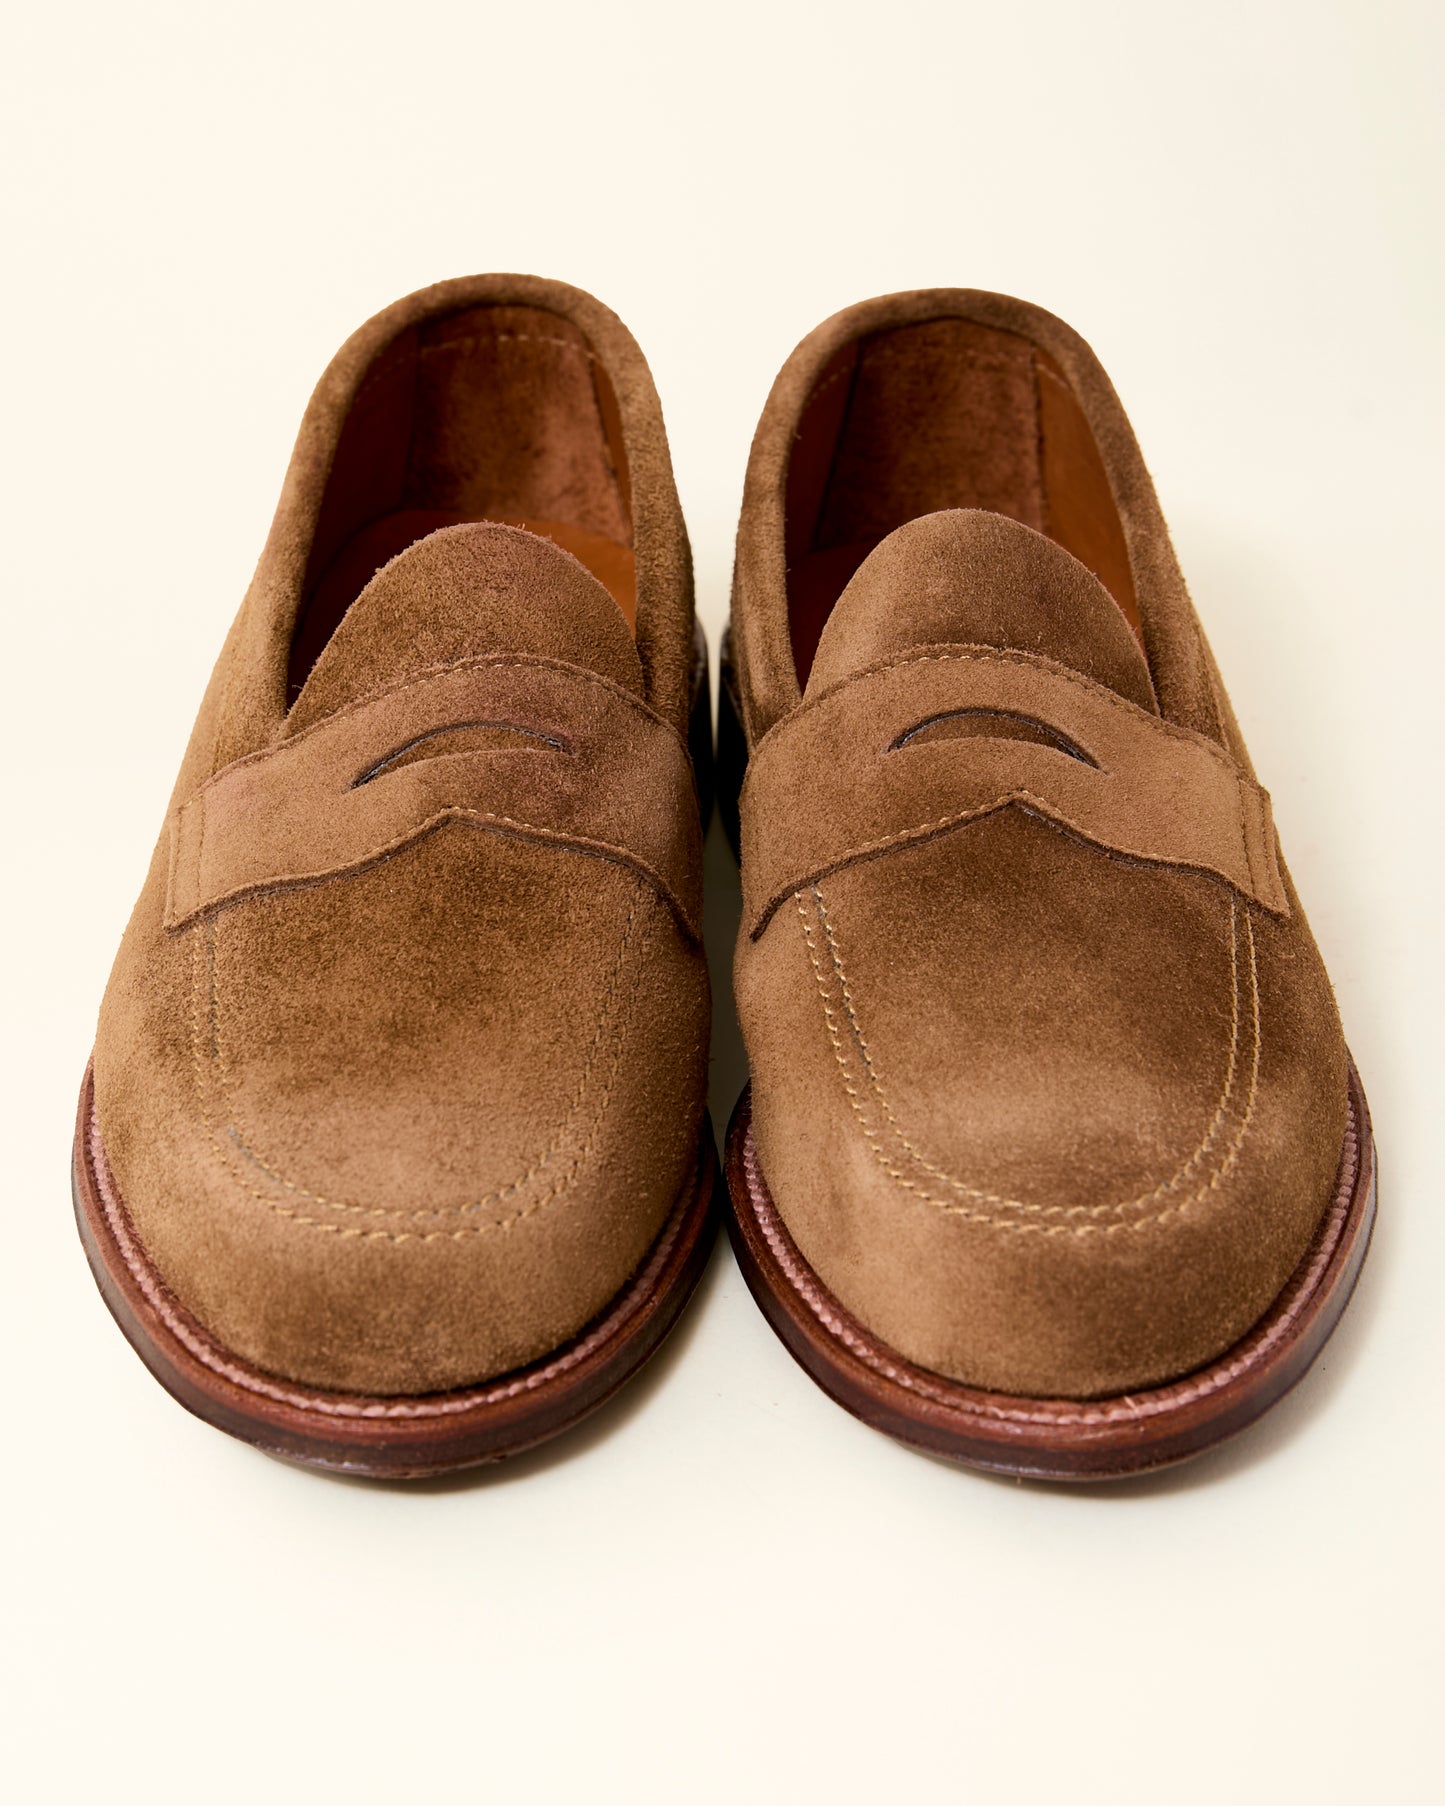 5735F Unlined Penny Loafer in Snuff Suede, Van Last